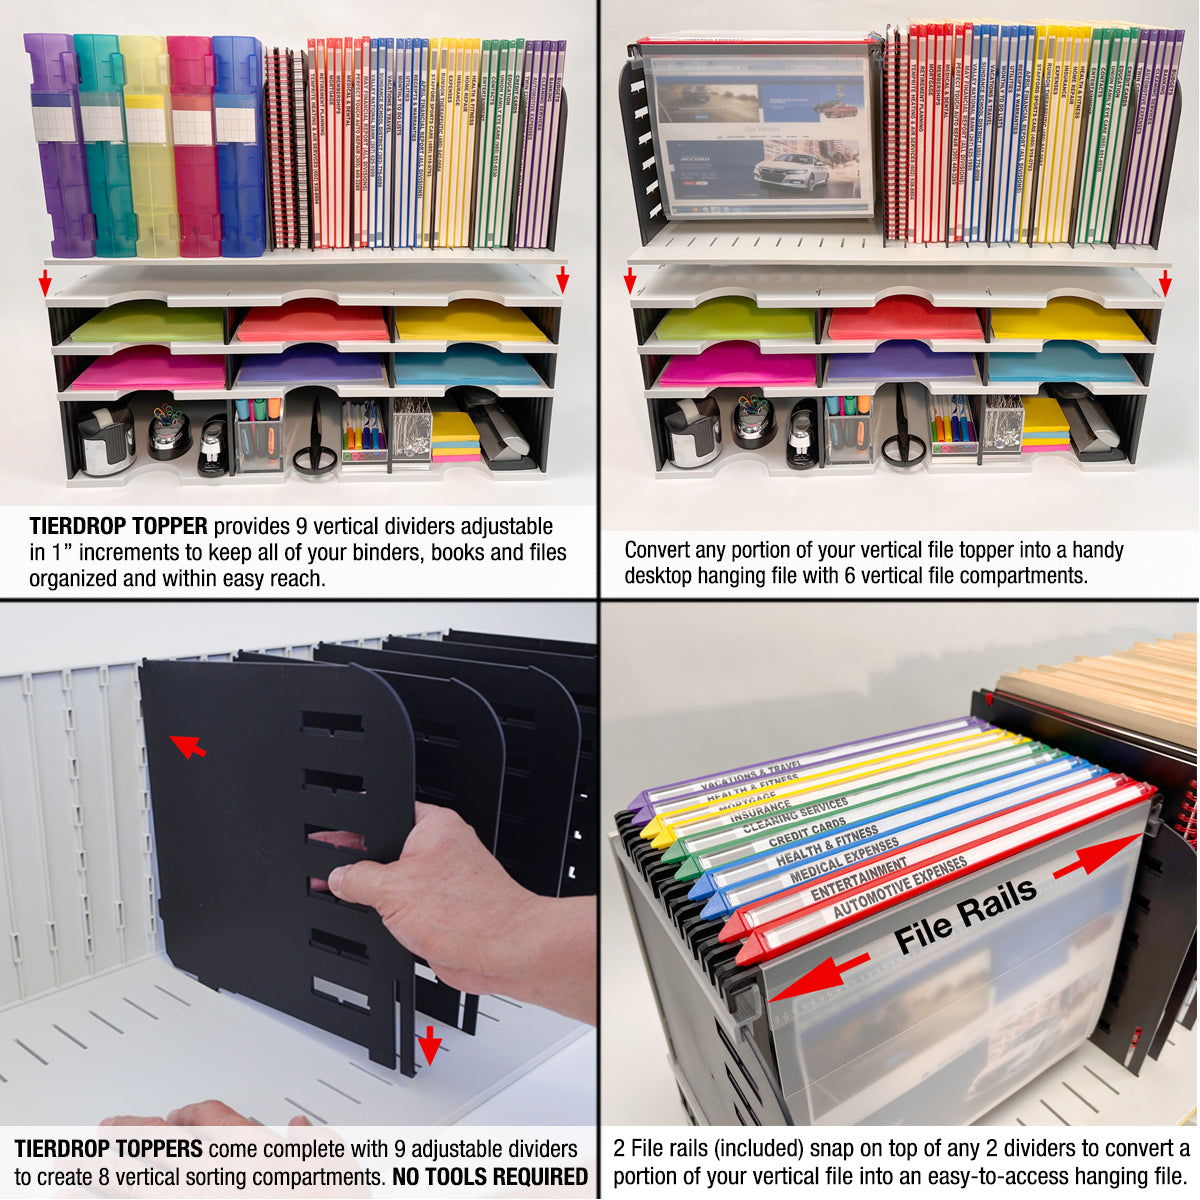 Desktop Organizer 6 Letter Tray Sorter, Riser Storage Base and Hanging File Topper - Uses Vertical Space to Keep All of Your Documents, Files, Forms